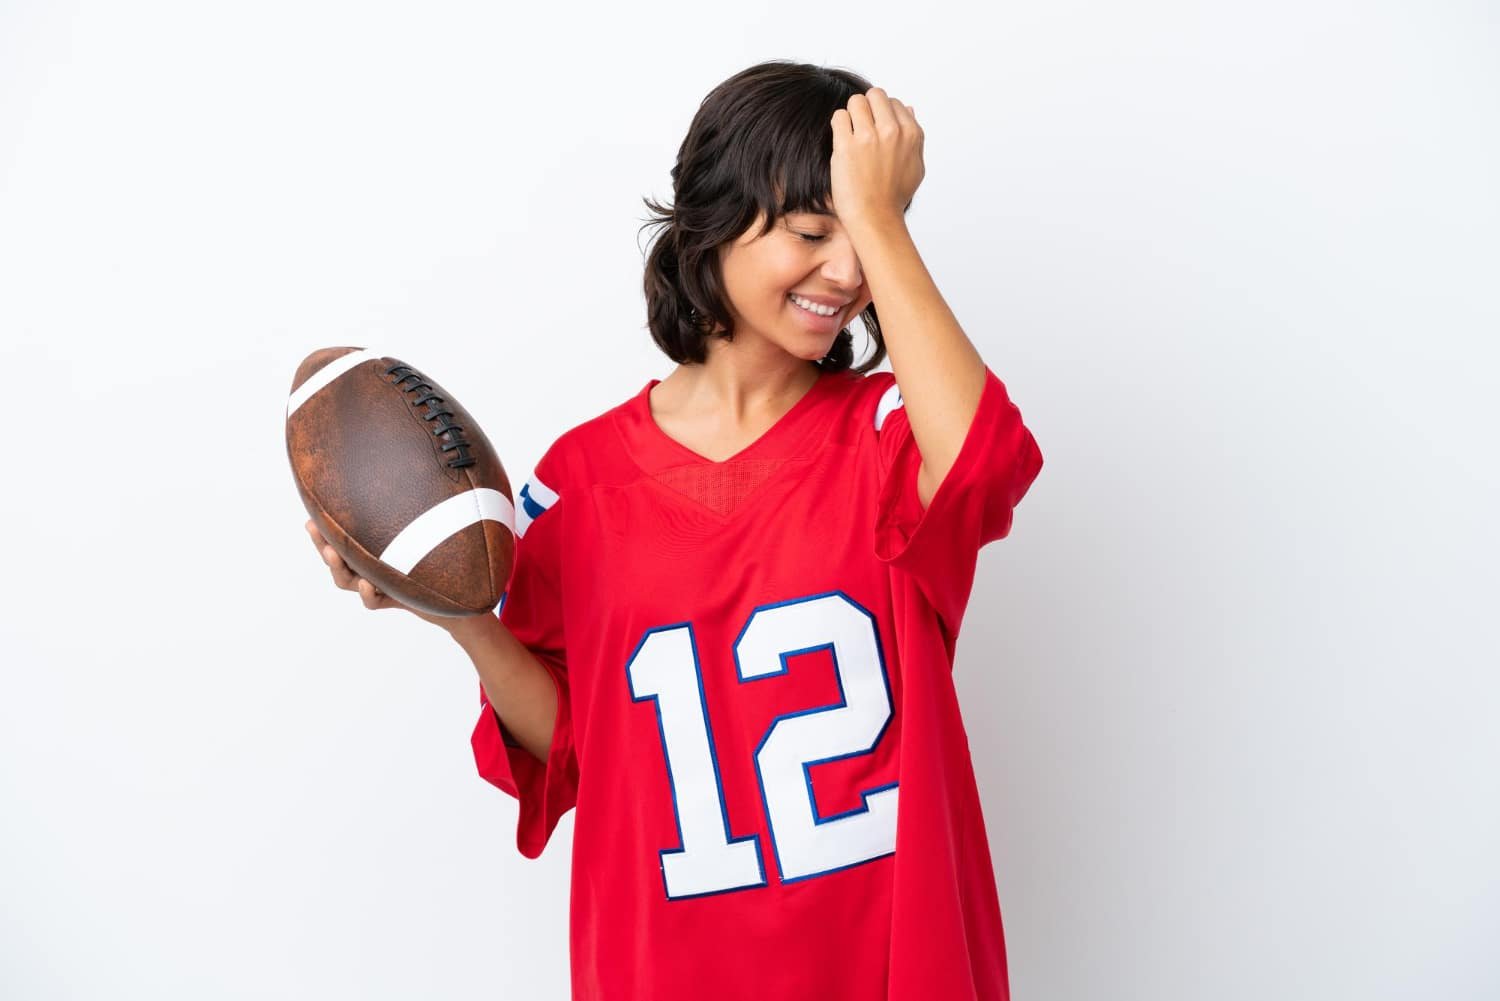 Support Your Favorite NFL Team With San Francisco 49ers Fan Shop’s Official Merchandise